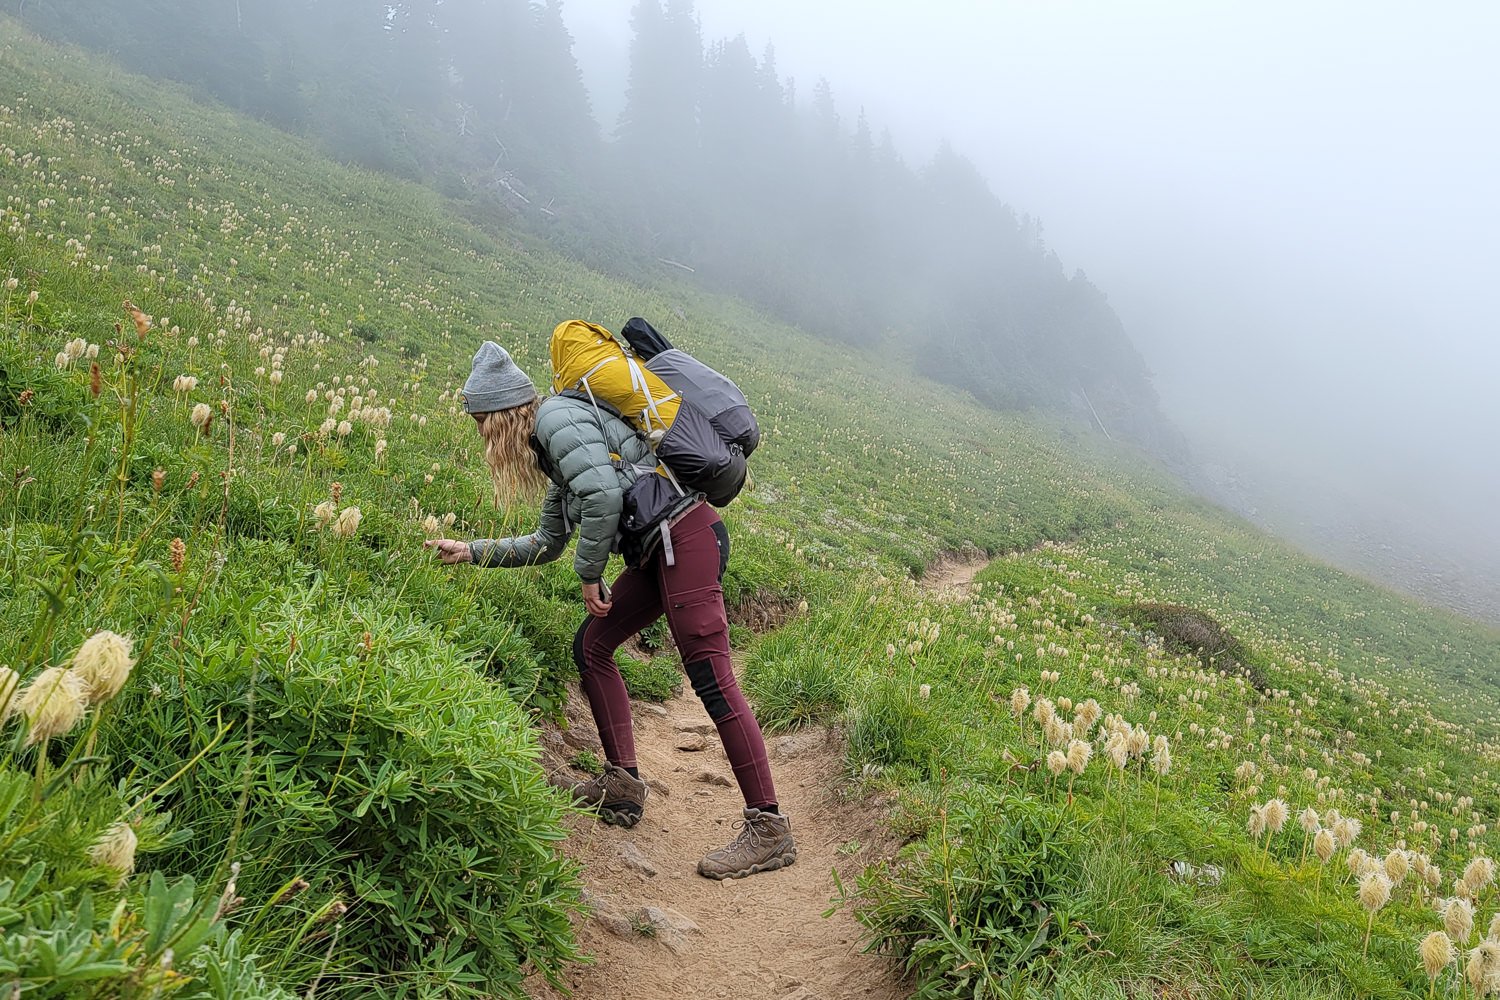 A hiker wearing leggings smelling a flower on a misty morning in the mountains